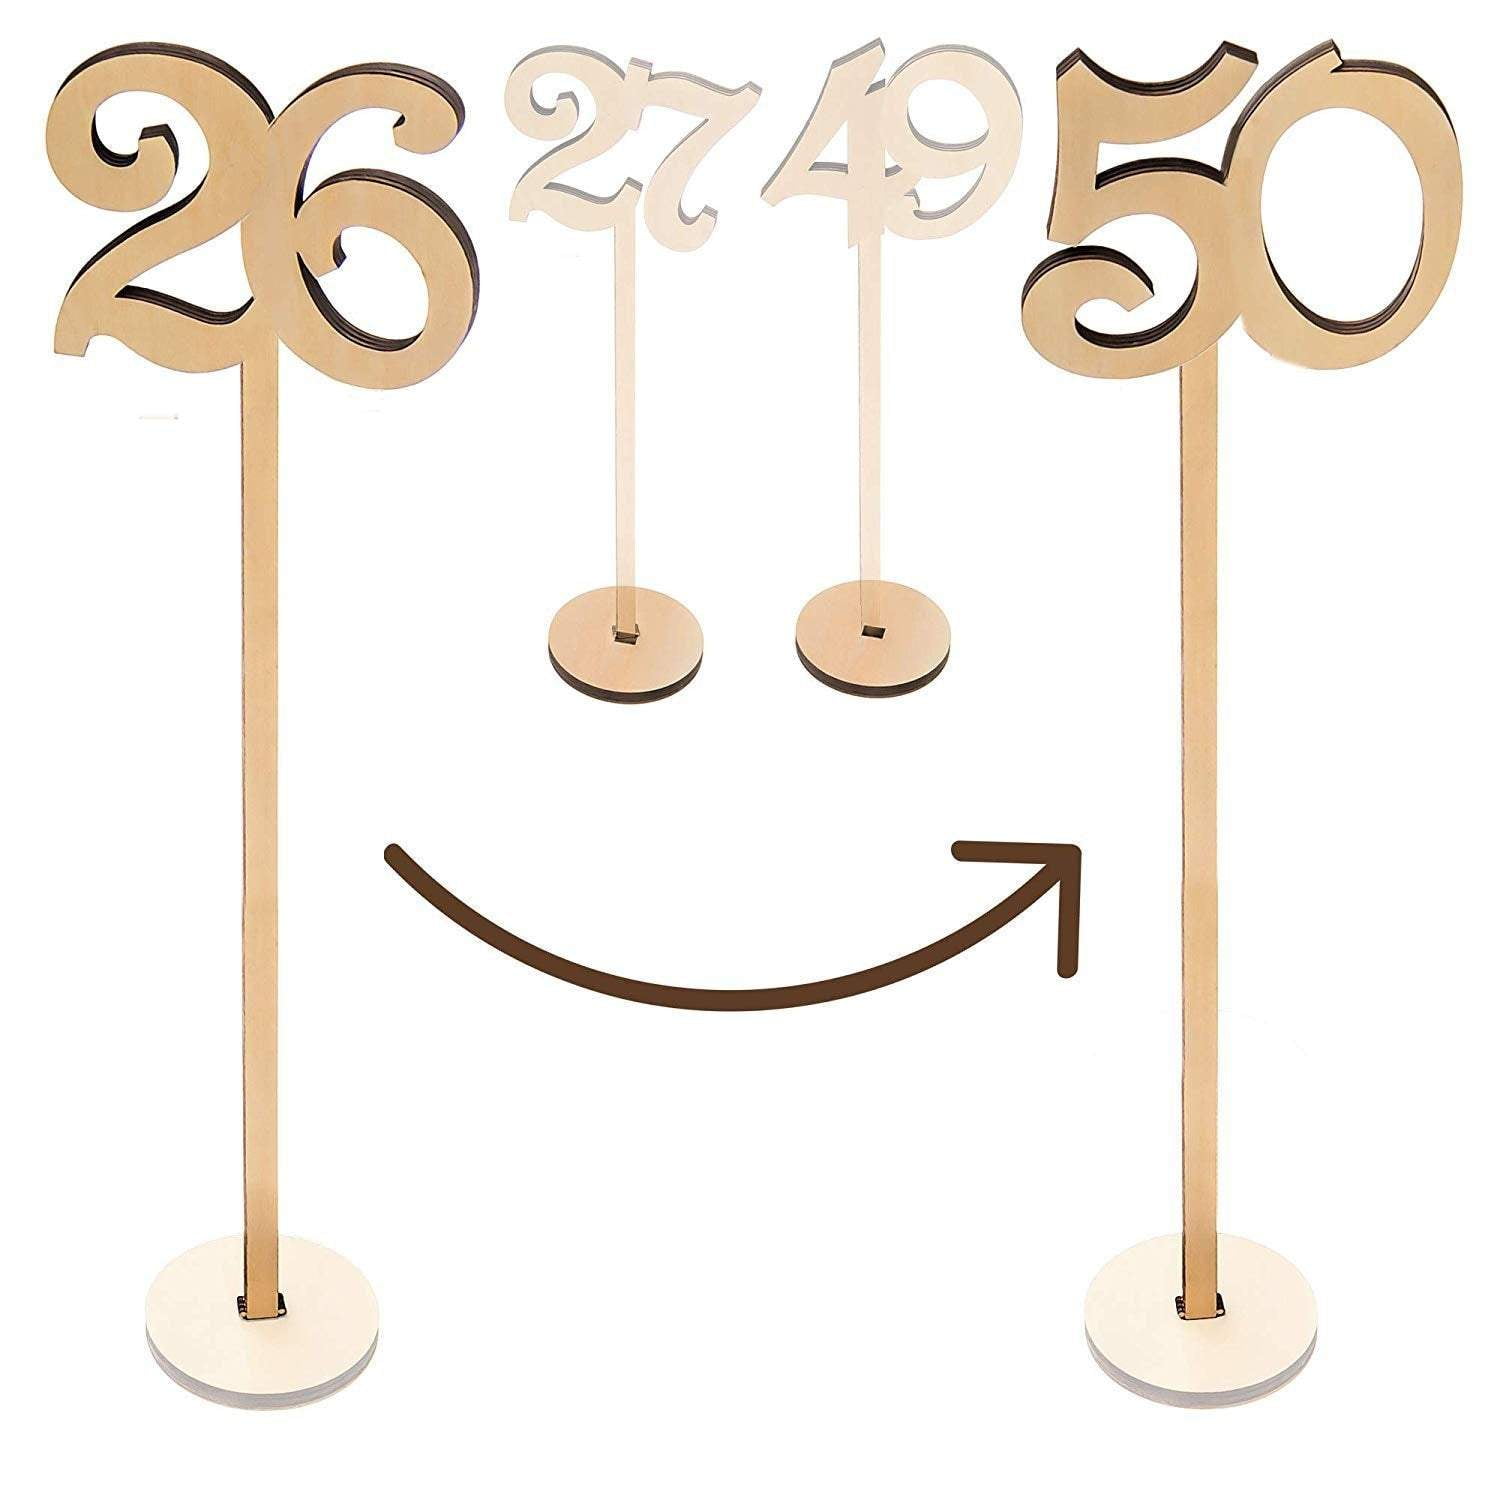 Restaurants Cafés 13.5 Tall Large Extra Thick Heavy Duty Commercial Grade Quality Wood Best for Receptions Parties Wooden Wedding Table Numbers 1-25 Pack Banquets Hotels Merry Expressions 